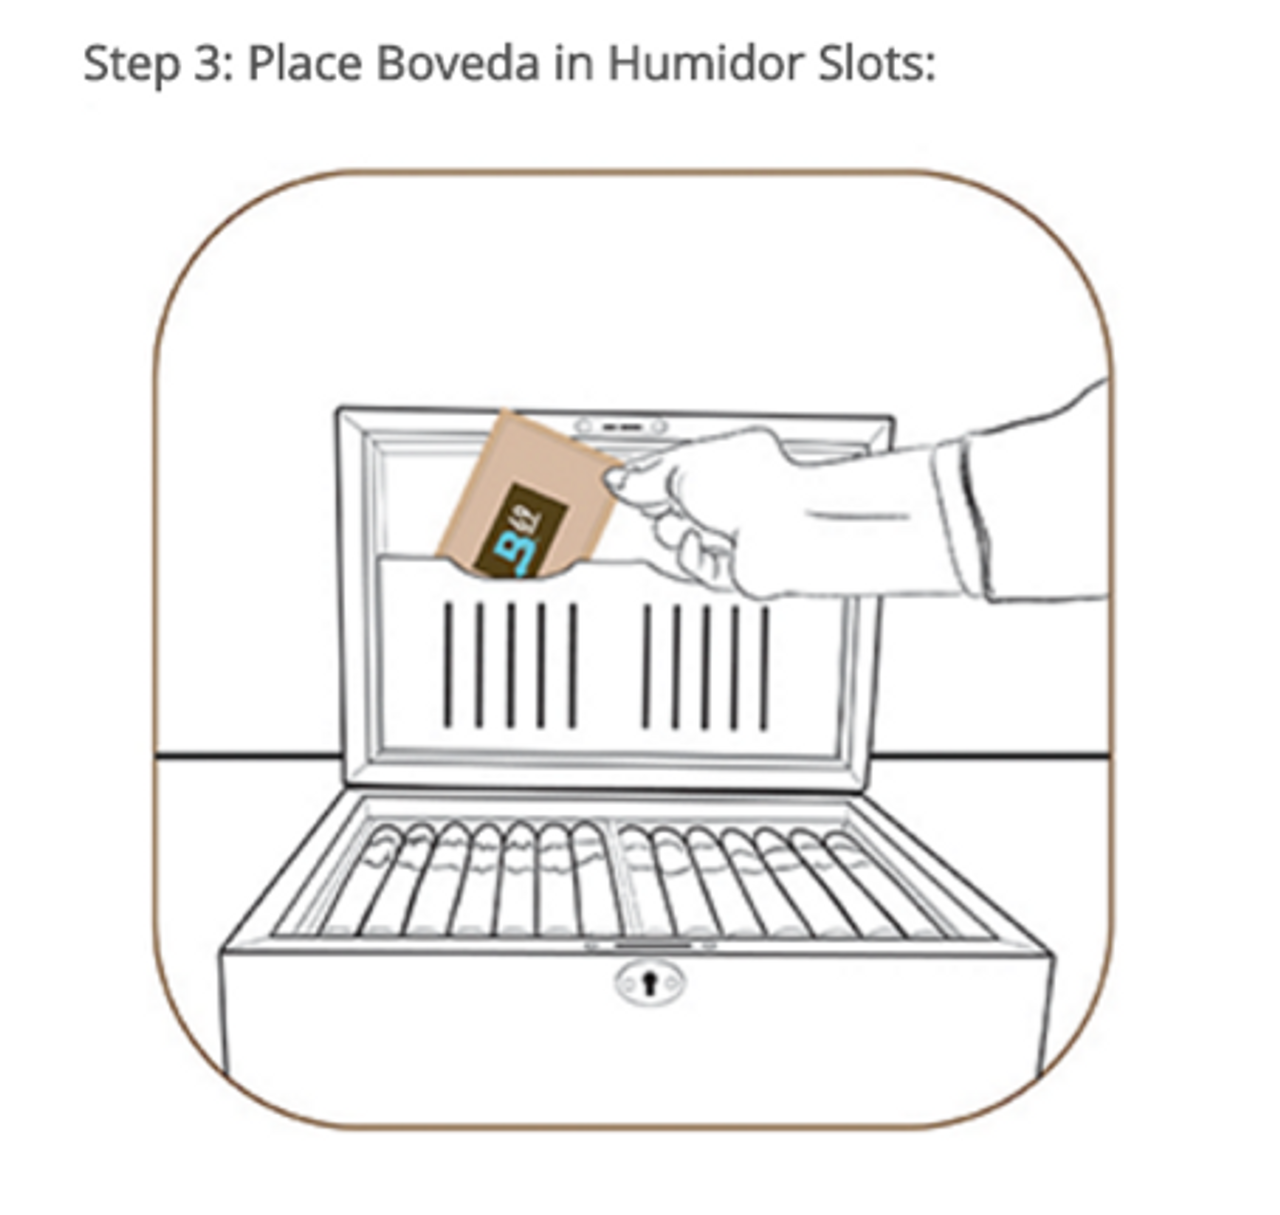 Boveda 72% Two-Way Humidity Control Packs For Wood Humidifier Boxes – Size  60 – 20 Pack – Moisture Absorbers – Humidifier Packs – Hydration Packets in